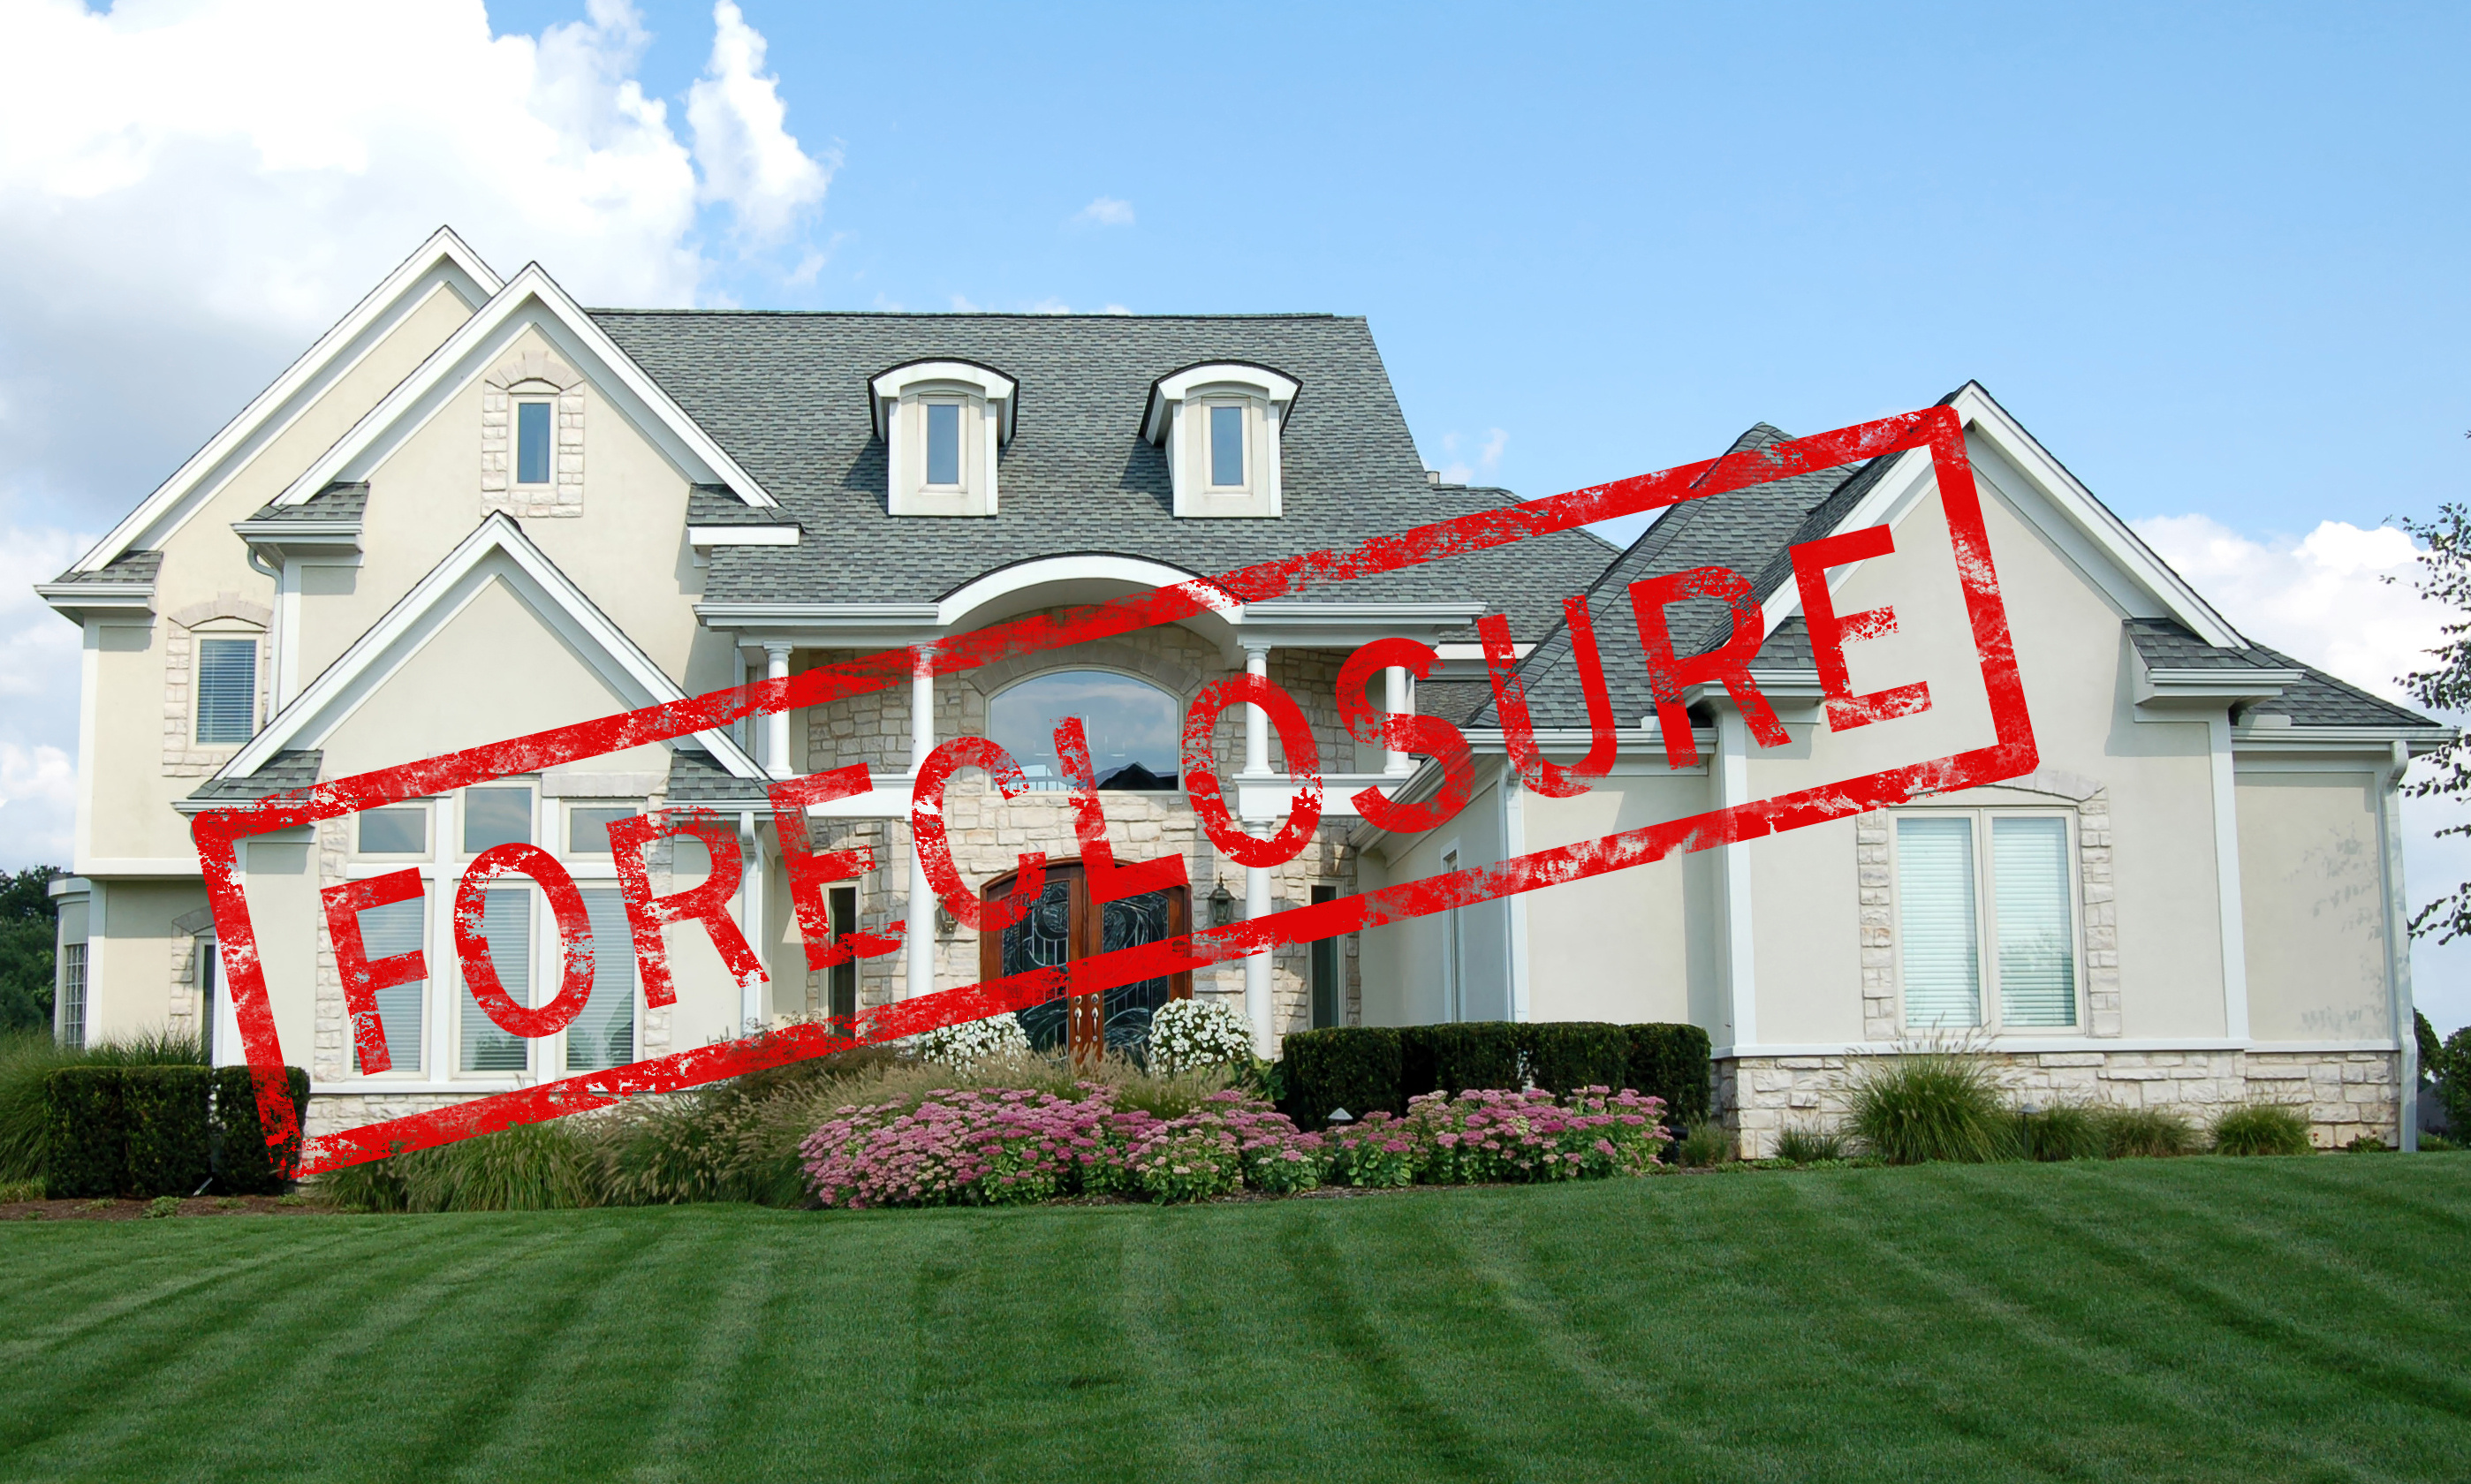 Call Brown Appraisal Services to discuss valuations for Roane foreclosures